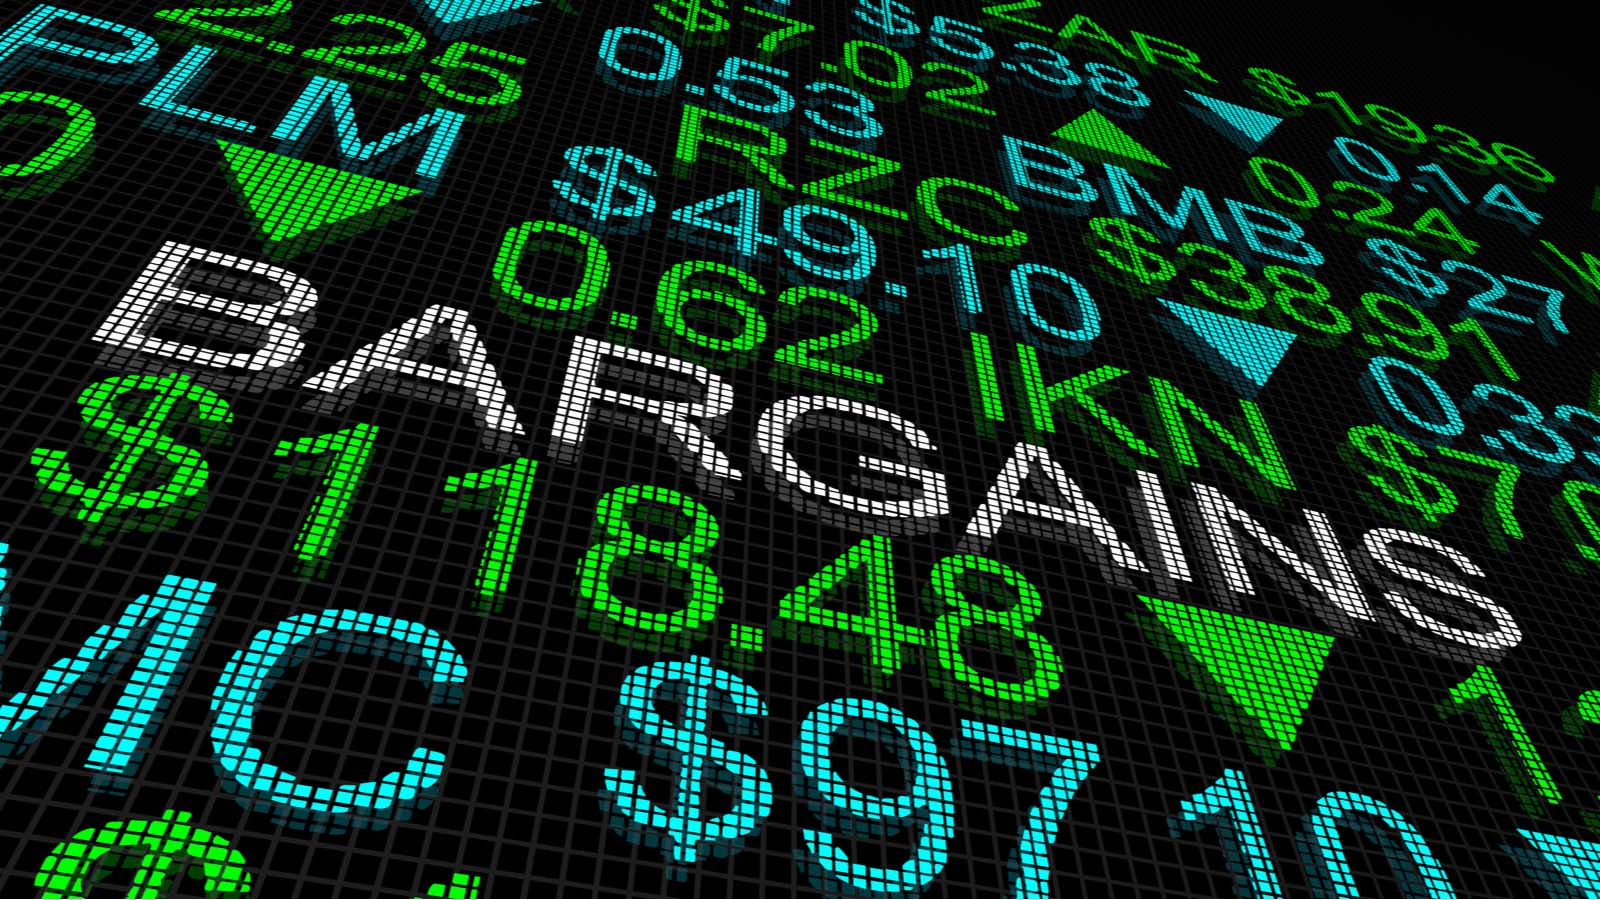 bargain stocks to buy: stock market tickers with the word "bargains" appearing in the center of the board